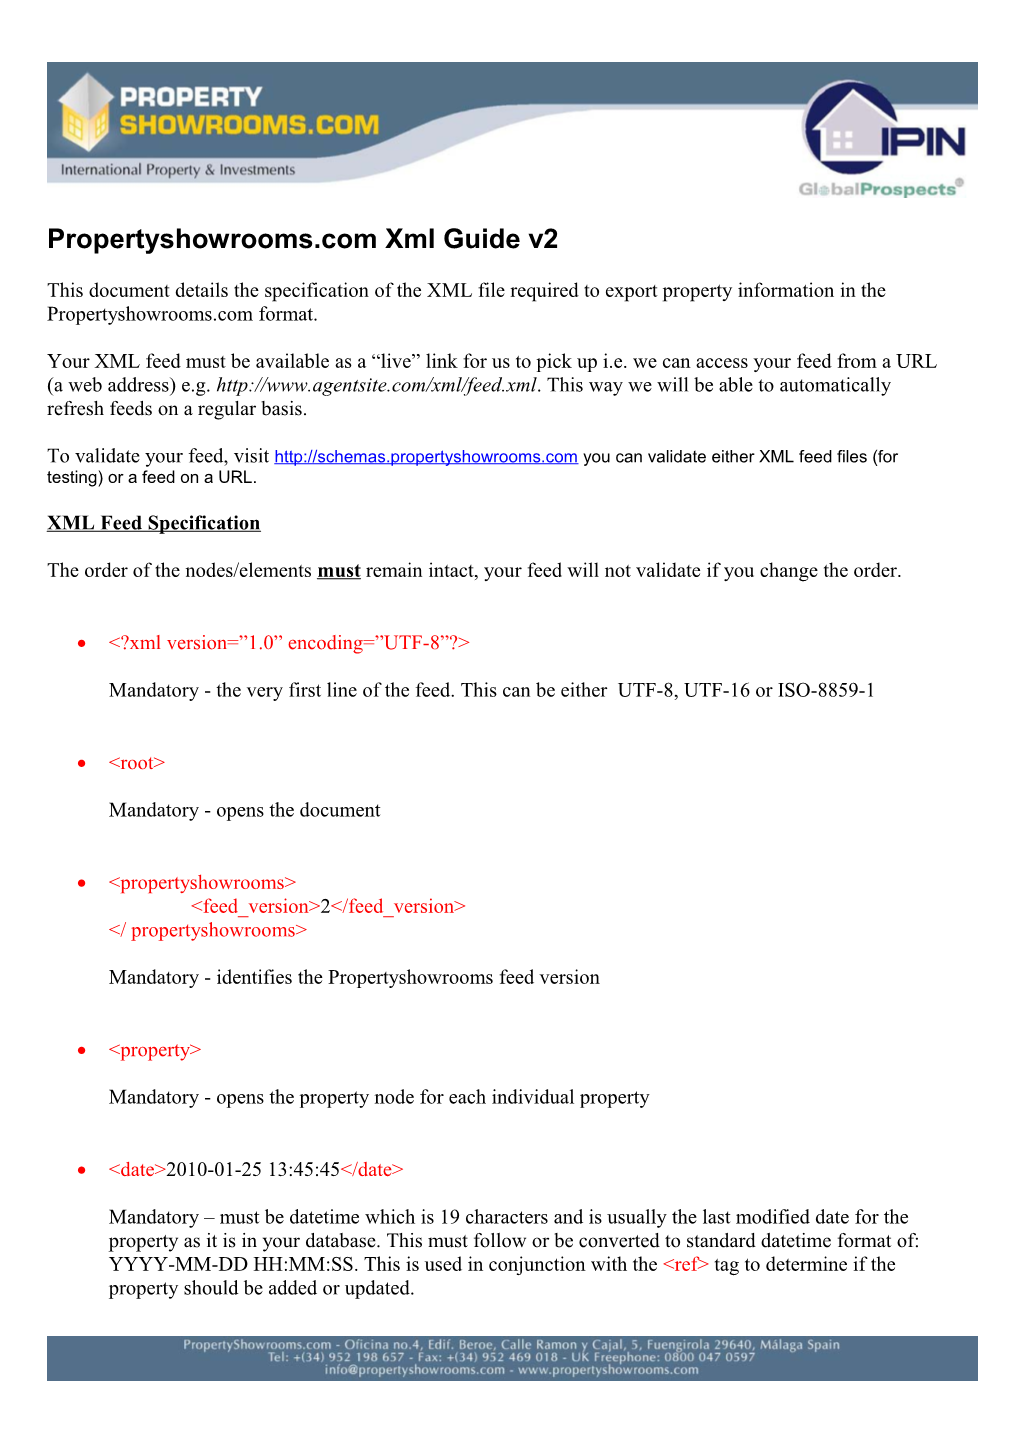 Propertyshowrooms.Com Xml Guide V2 This Document Details the Specification of the XML